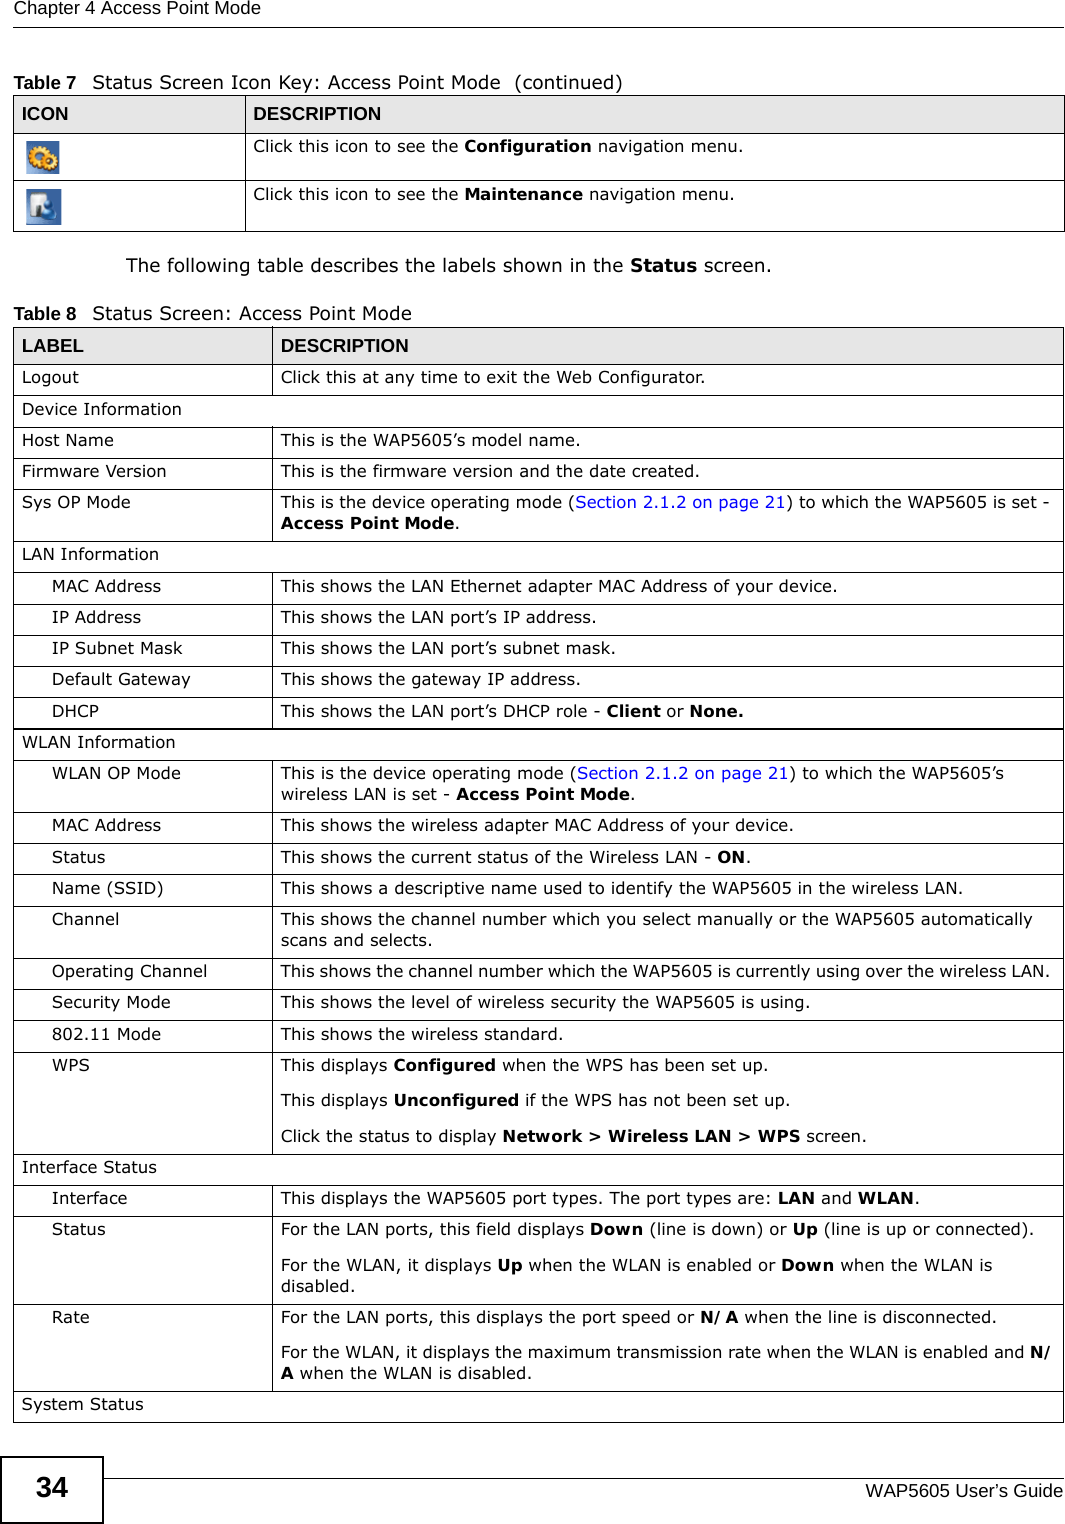 Chapter 4 Access Point ModeWAP5605 User’s Guide34The following table describes the labels shown in the Status screen.Click this icon to see the Configuration navigation menu. Click this icon to see the Maintenance navigation menu. Table 7   Status Screen Icon Key: Access Point Mode  (continued)ICON DESCRIPTIONTable 8   Status Screen: Access Point Mode LABEL DESCRIPTIONLogout Click this at any time to exit the Web Configurator.Device InformationHost Name This is the WAP5605’s model name.Firmware Version This is the firmware version and the date created. Sys OP Mode This is the device operating mode (Section 2.1.2 on page 21) to which the WAP5605 is set - Access Point Mode.LAN InformationMAC Address This shows the LAN Ethernet adapter MAC Address of your device.IP Address This shows the LAN port’s IP address.IP Subnet Mask This shows the LAN port’s subnet mask.Default Gateway This shows the gateway IP address.DHCP This shows the LAN port’s DHCP role - Client or None.WLAN InformationWLAN OP Mode This is the device operating mode (Section 2.1.2 on page 21) to which the WAP5605’s wireless LAN is set - Access Point Mode.MAC Address This shows the wireless adapter MAC Address of your device.Status This shows the current status of the Wireless LAN - ON.Name (SSID) This shows a descriptive name used to identify the WAP5605 in the wireless LAN. Channel This shows the channel number which you select manually or the WAP5605 automatically scans and selects.Operating Channel This shows the channel number which the WAP5605 is currently using over the wireless LAN. Security Mode This shows the level of wireless security the WAP5605 is using.802.11 Mode This shows the wireless standard.WPS This displays Configured when the WPS has been set up. This displays Unconfigured if the WPS has not been set up.Click the status to display Network &gt; Wireless LAN &gt; WPS screen.Interface StatusInterface This displays the WAP5605 port types. The port types are: LAN and WLAN.Status For the LAN ports, this field displays Down (line is down) or Up (line is up or connected).For the WLAN, it displays Up when the WLAN is enabled or Down when the WLAN is disabled.Rate For the LAN ports, this displays the port speed or N/A when the line is disconnected.For the WLAN, it displays the maximum transmission rate when the WLAN is enabled and N/A when the WLAN is disabled.System Status